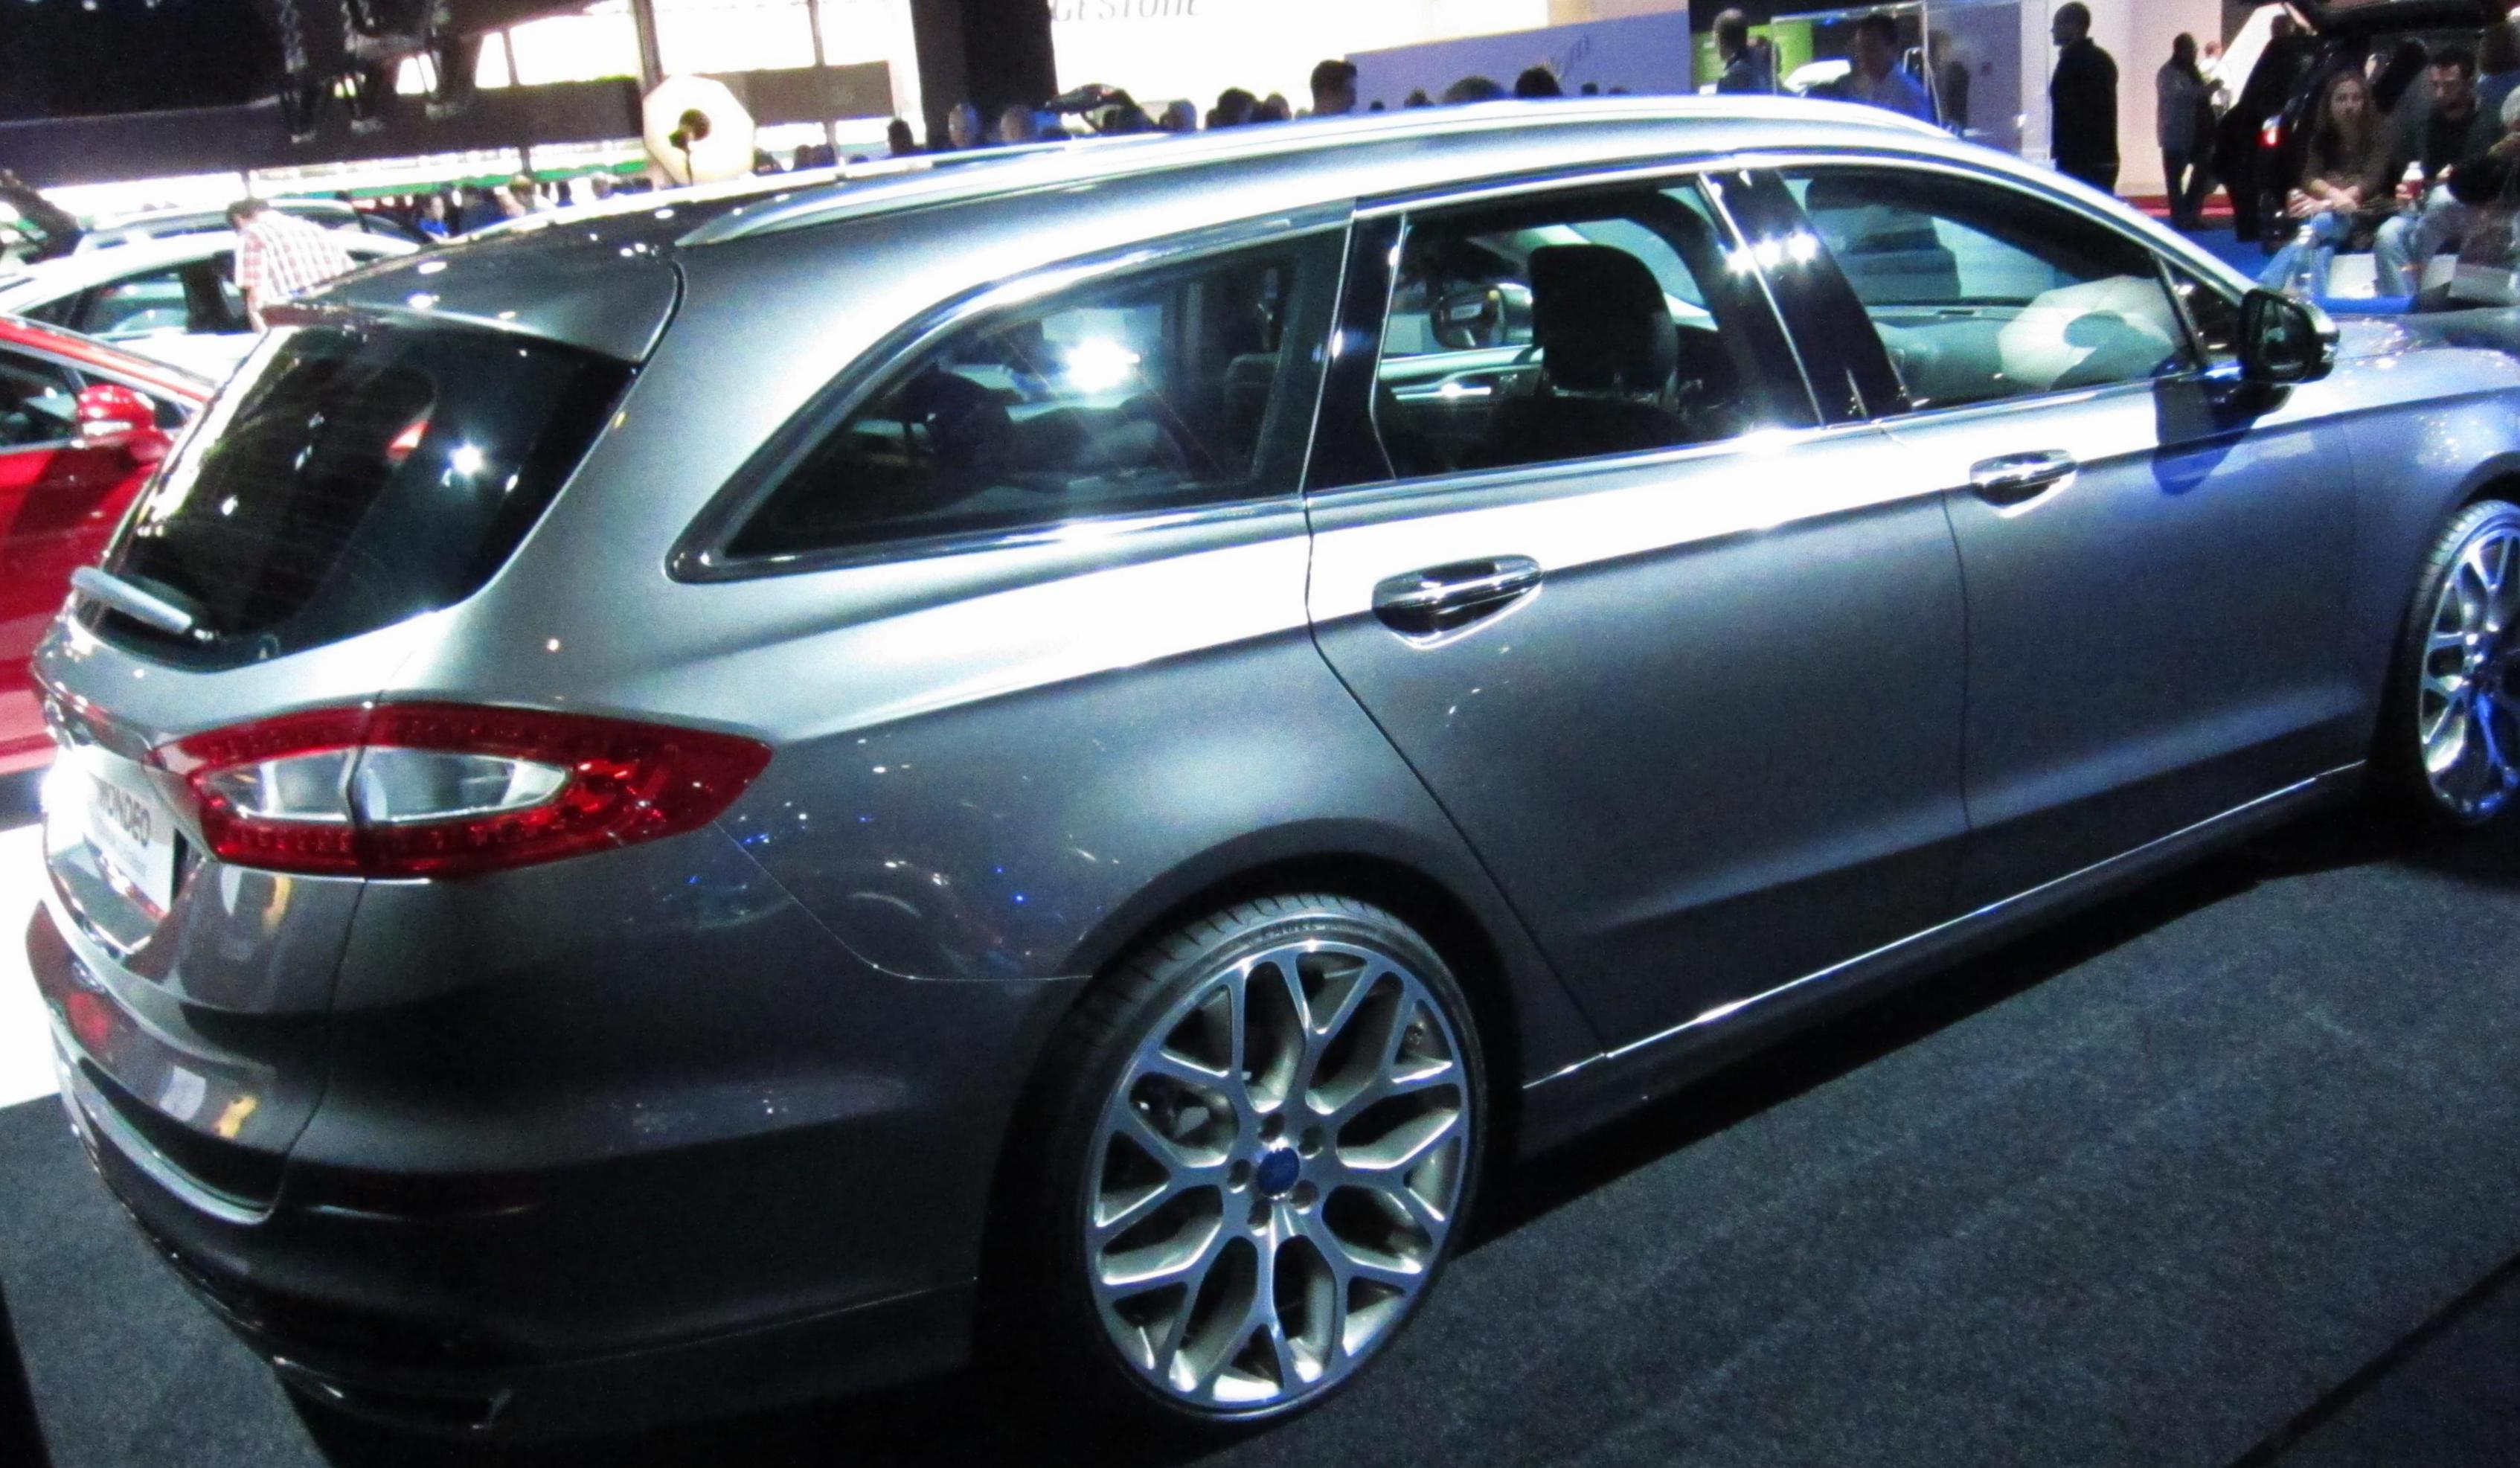 Ford Mondeo Wagon Specifications sedan